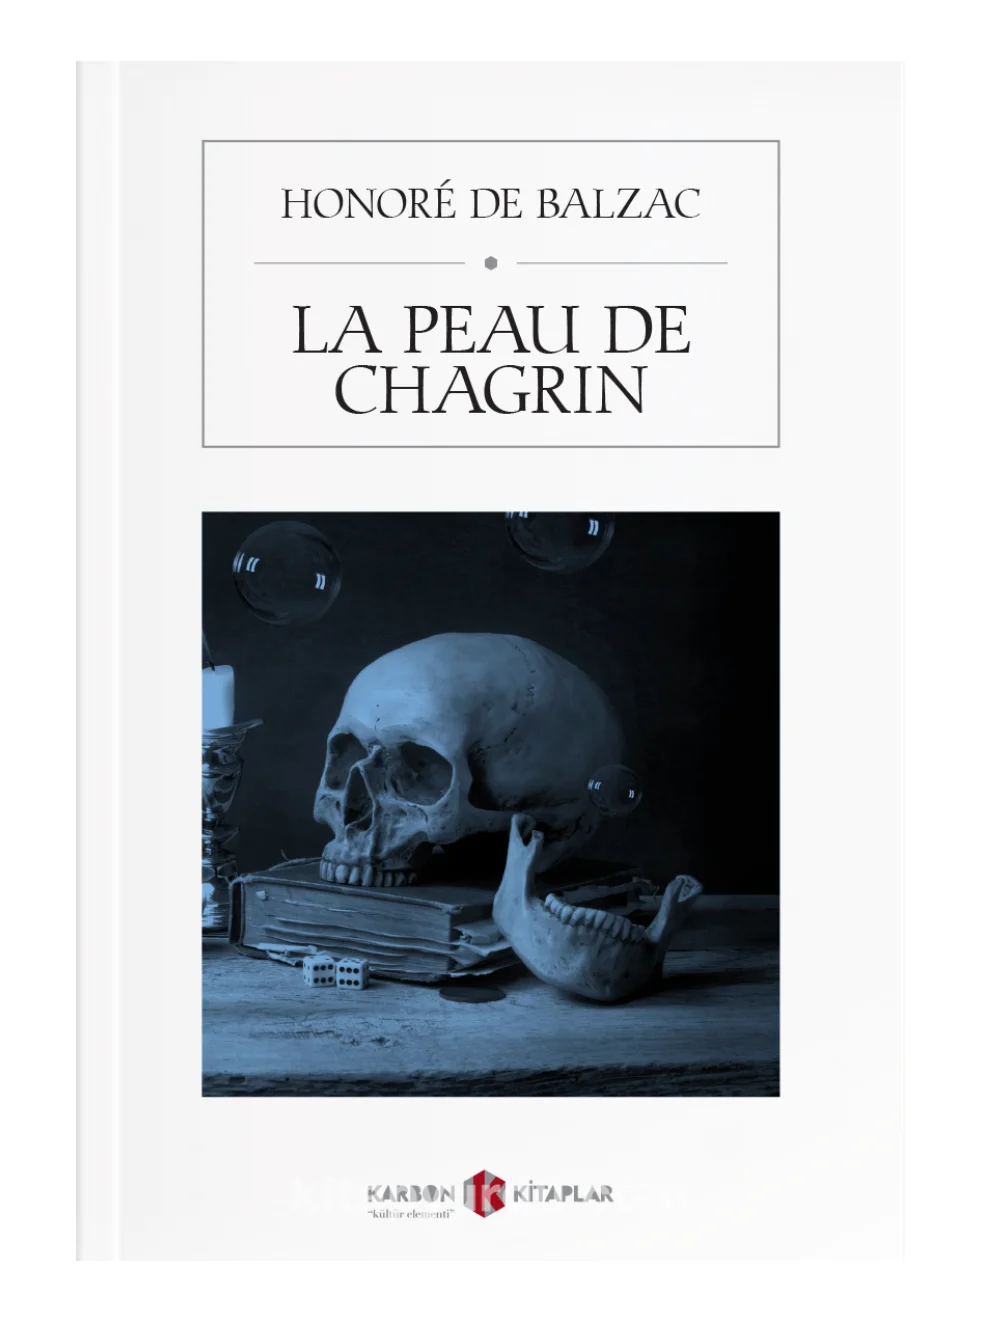 

The skin of sorrow - Honore de Balzac - French book - The best classics of world literature - Nice gift for friends and French learners